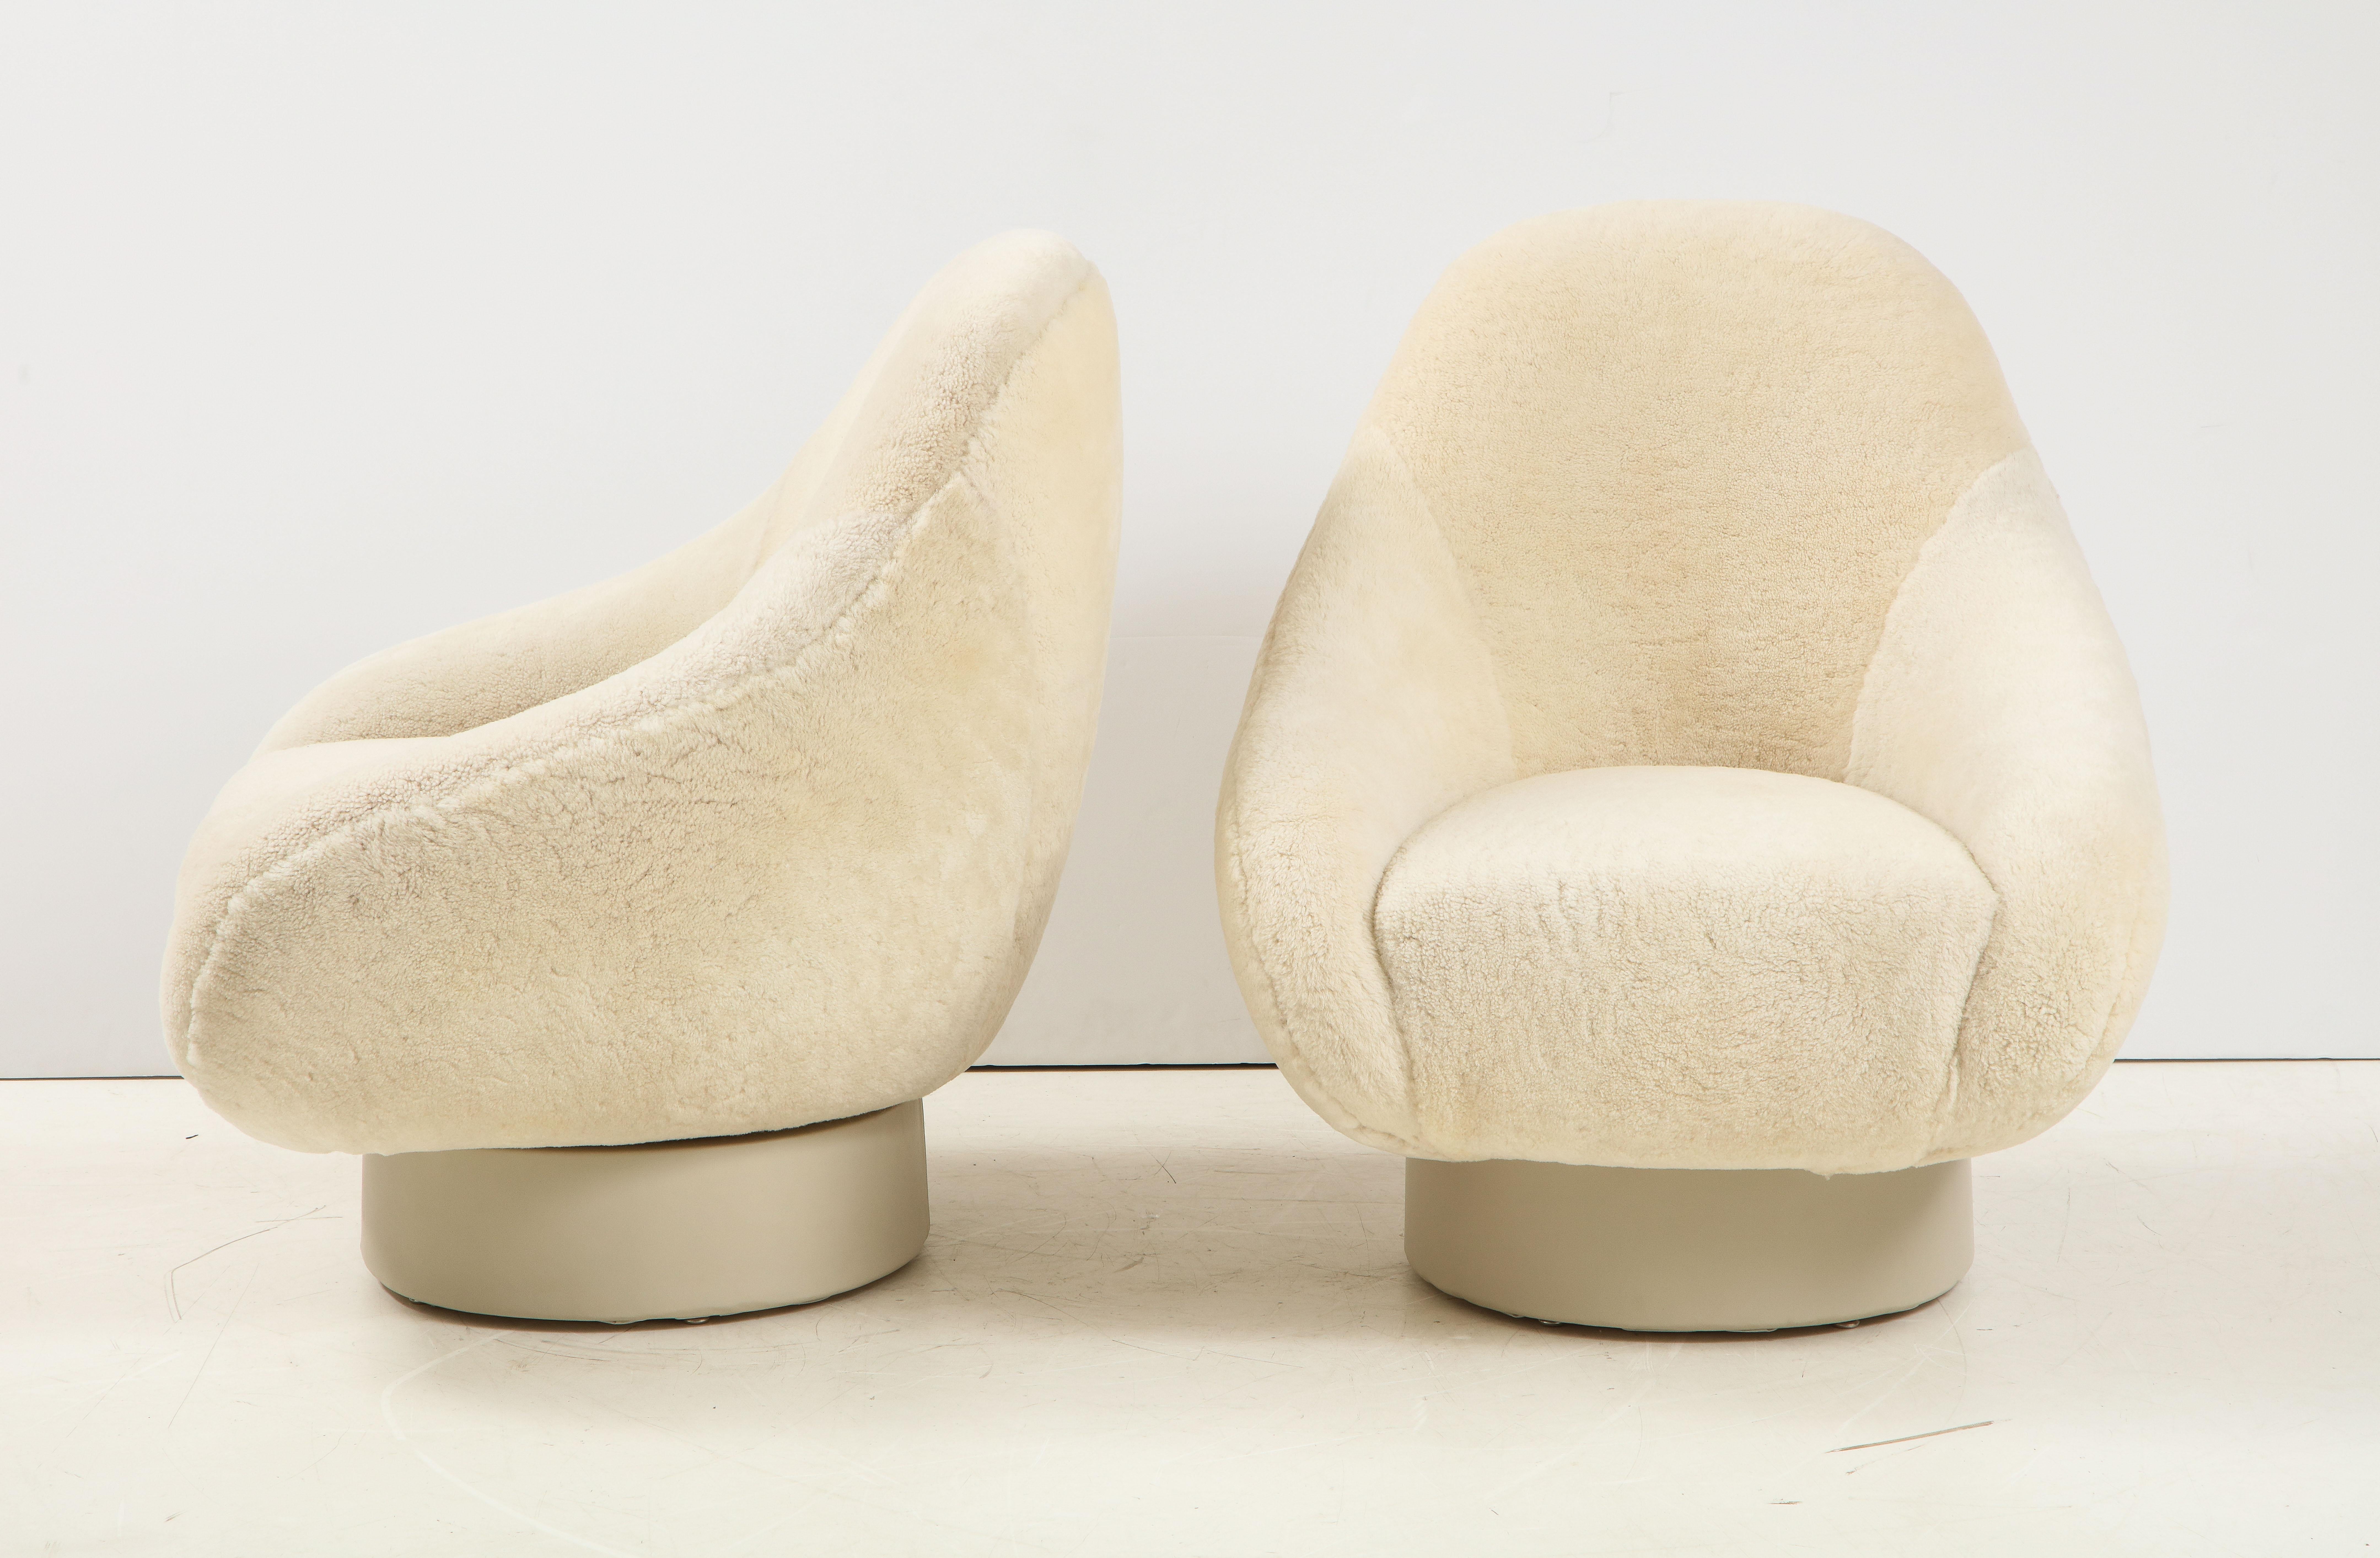 Pair of 1970s swivel clubchairs upholstered in a luxurious dense cream colored sheepskin, resting on cream/ivory colored leather wrapped fiberglass bases. Mint restored, new padding, hides and leather. Chairs swivel and are extremely comfortable and